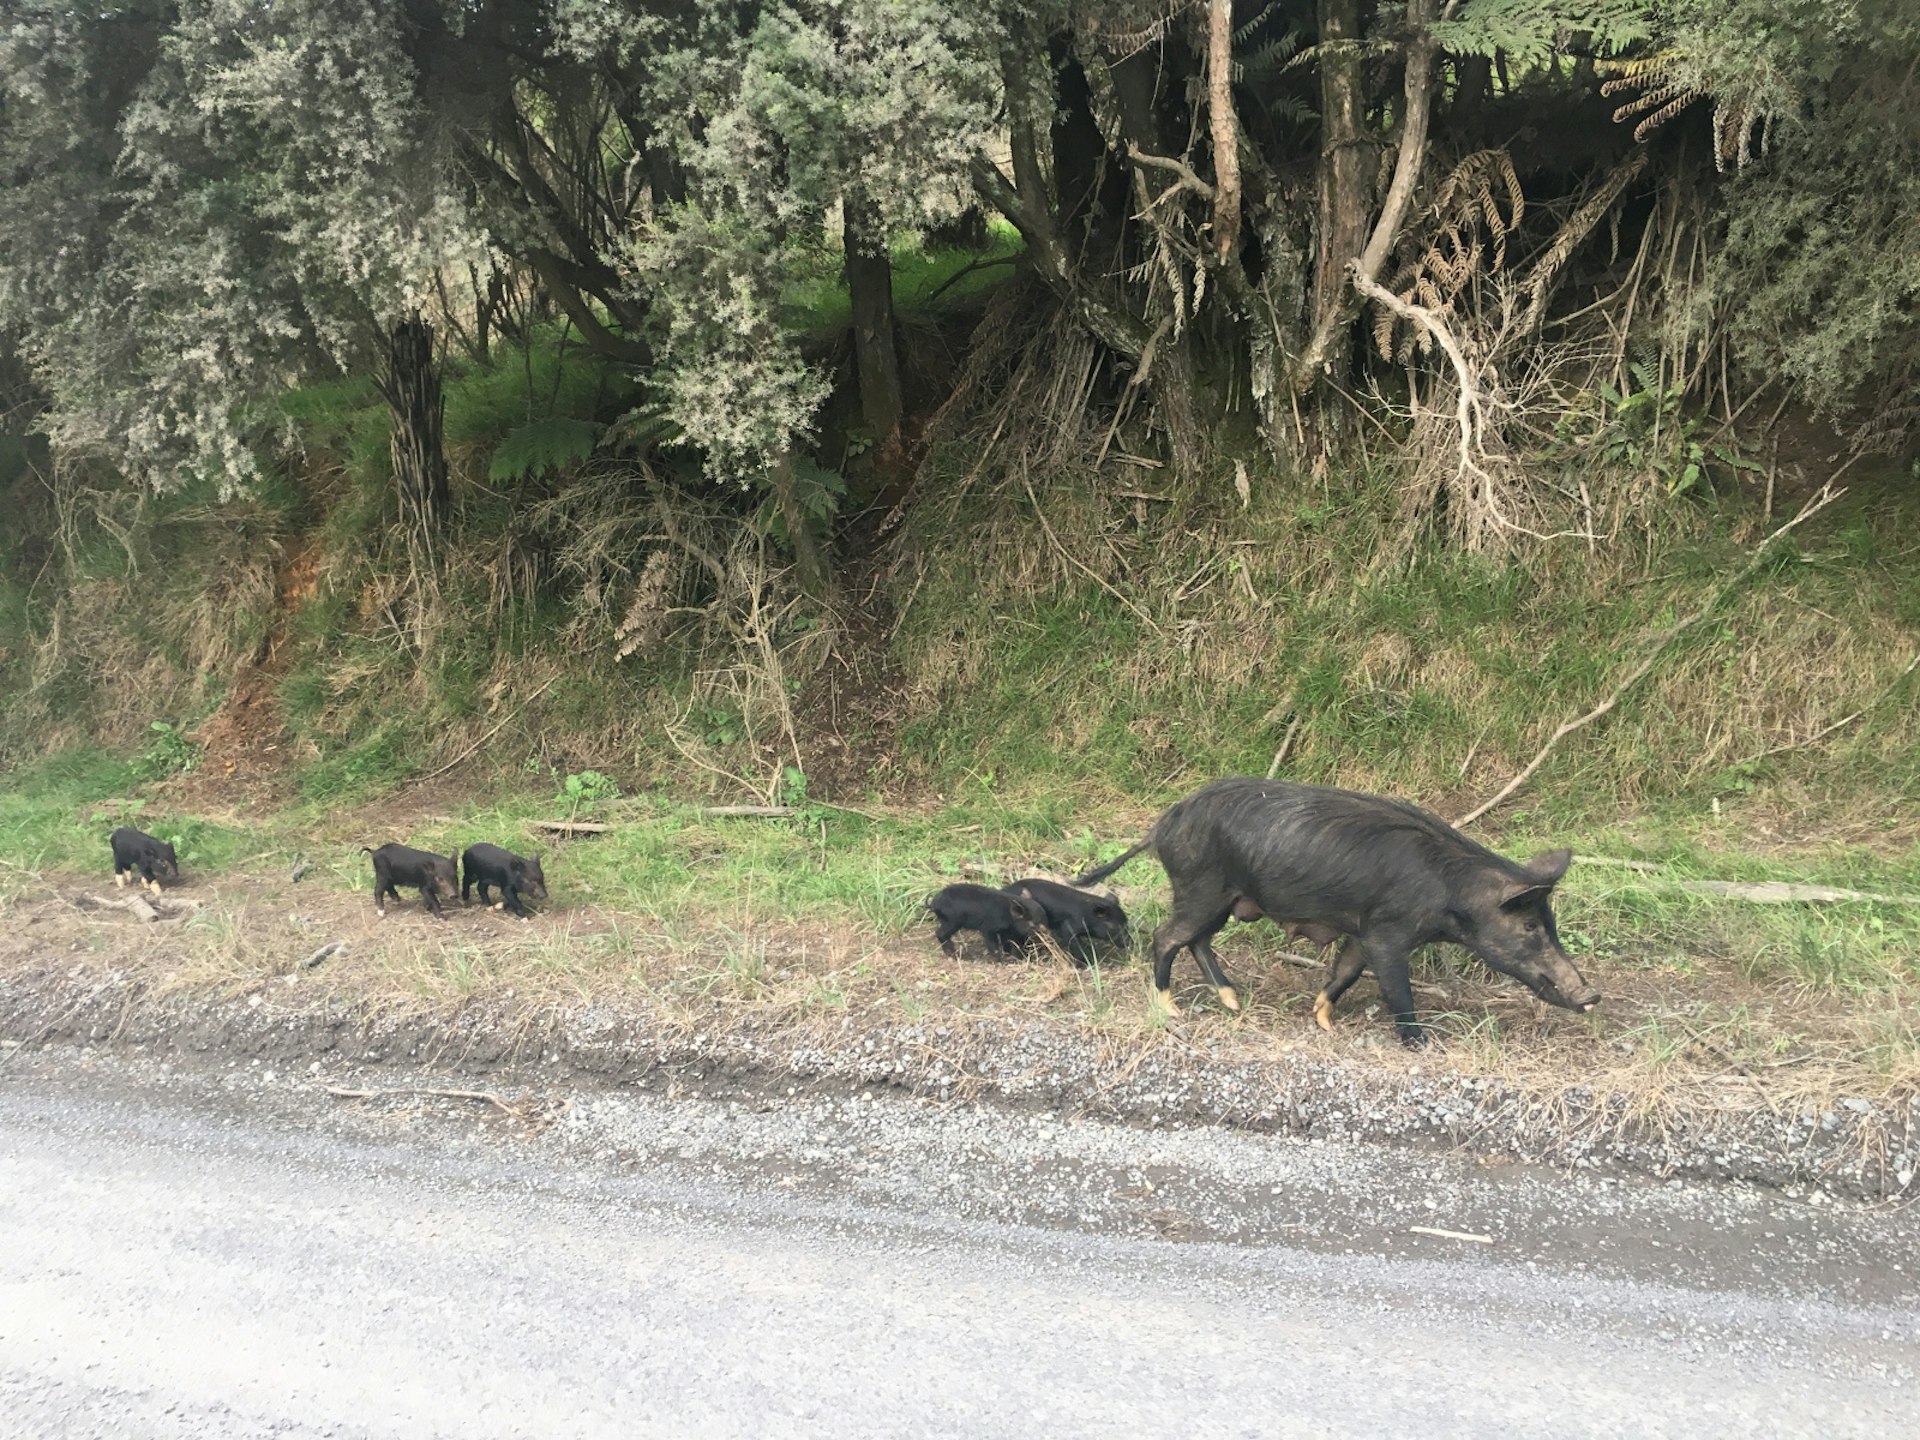 Pigs from Stu's pig farm walking along the side of the road